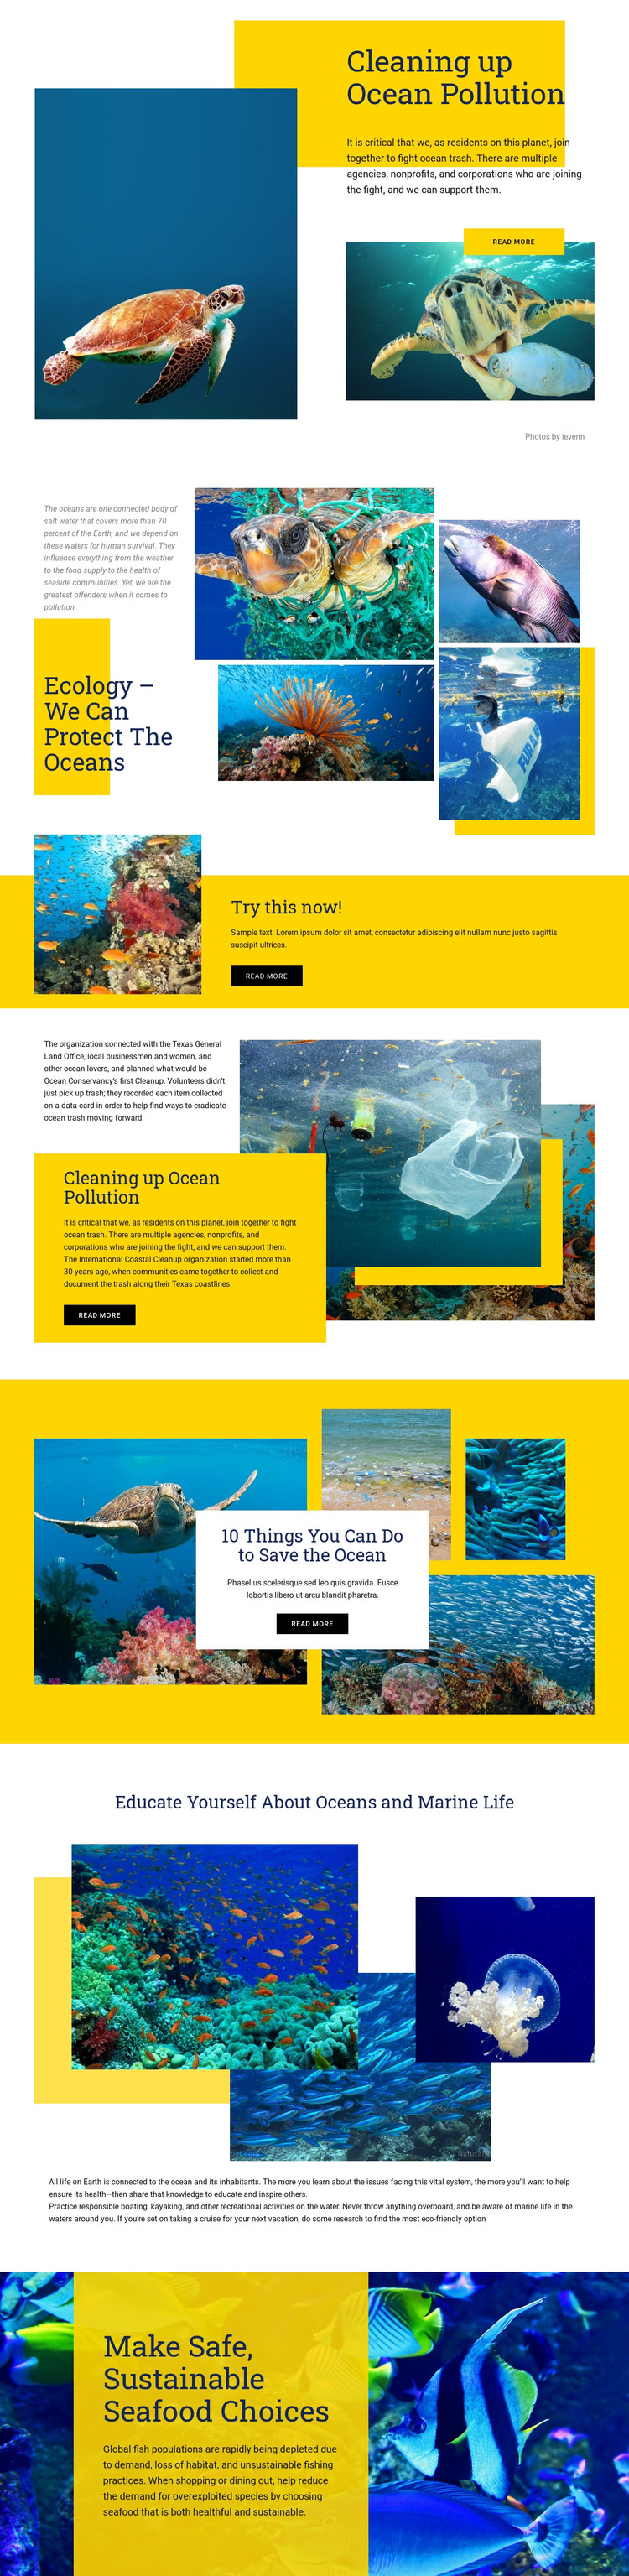 Protect The Oceans Homepage Design